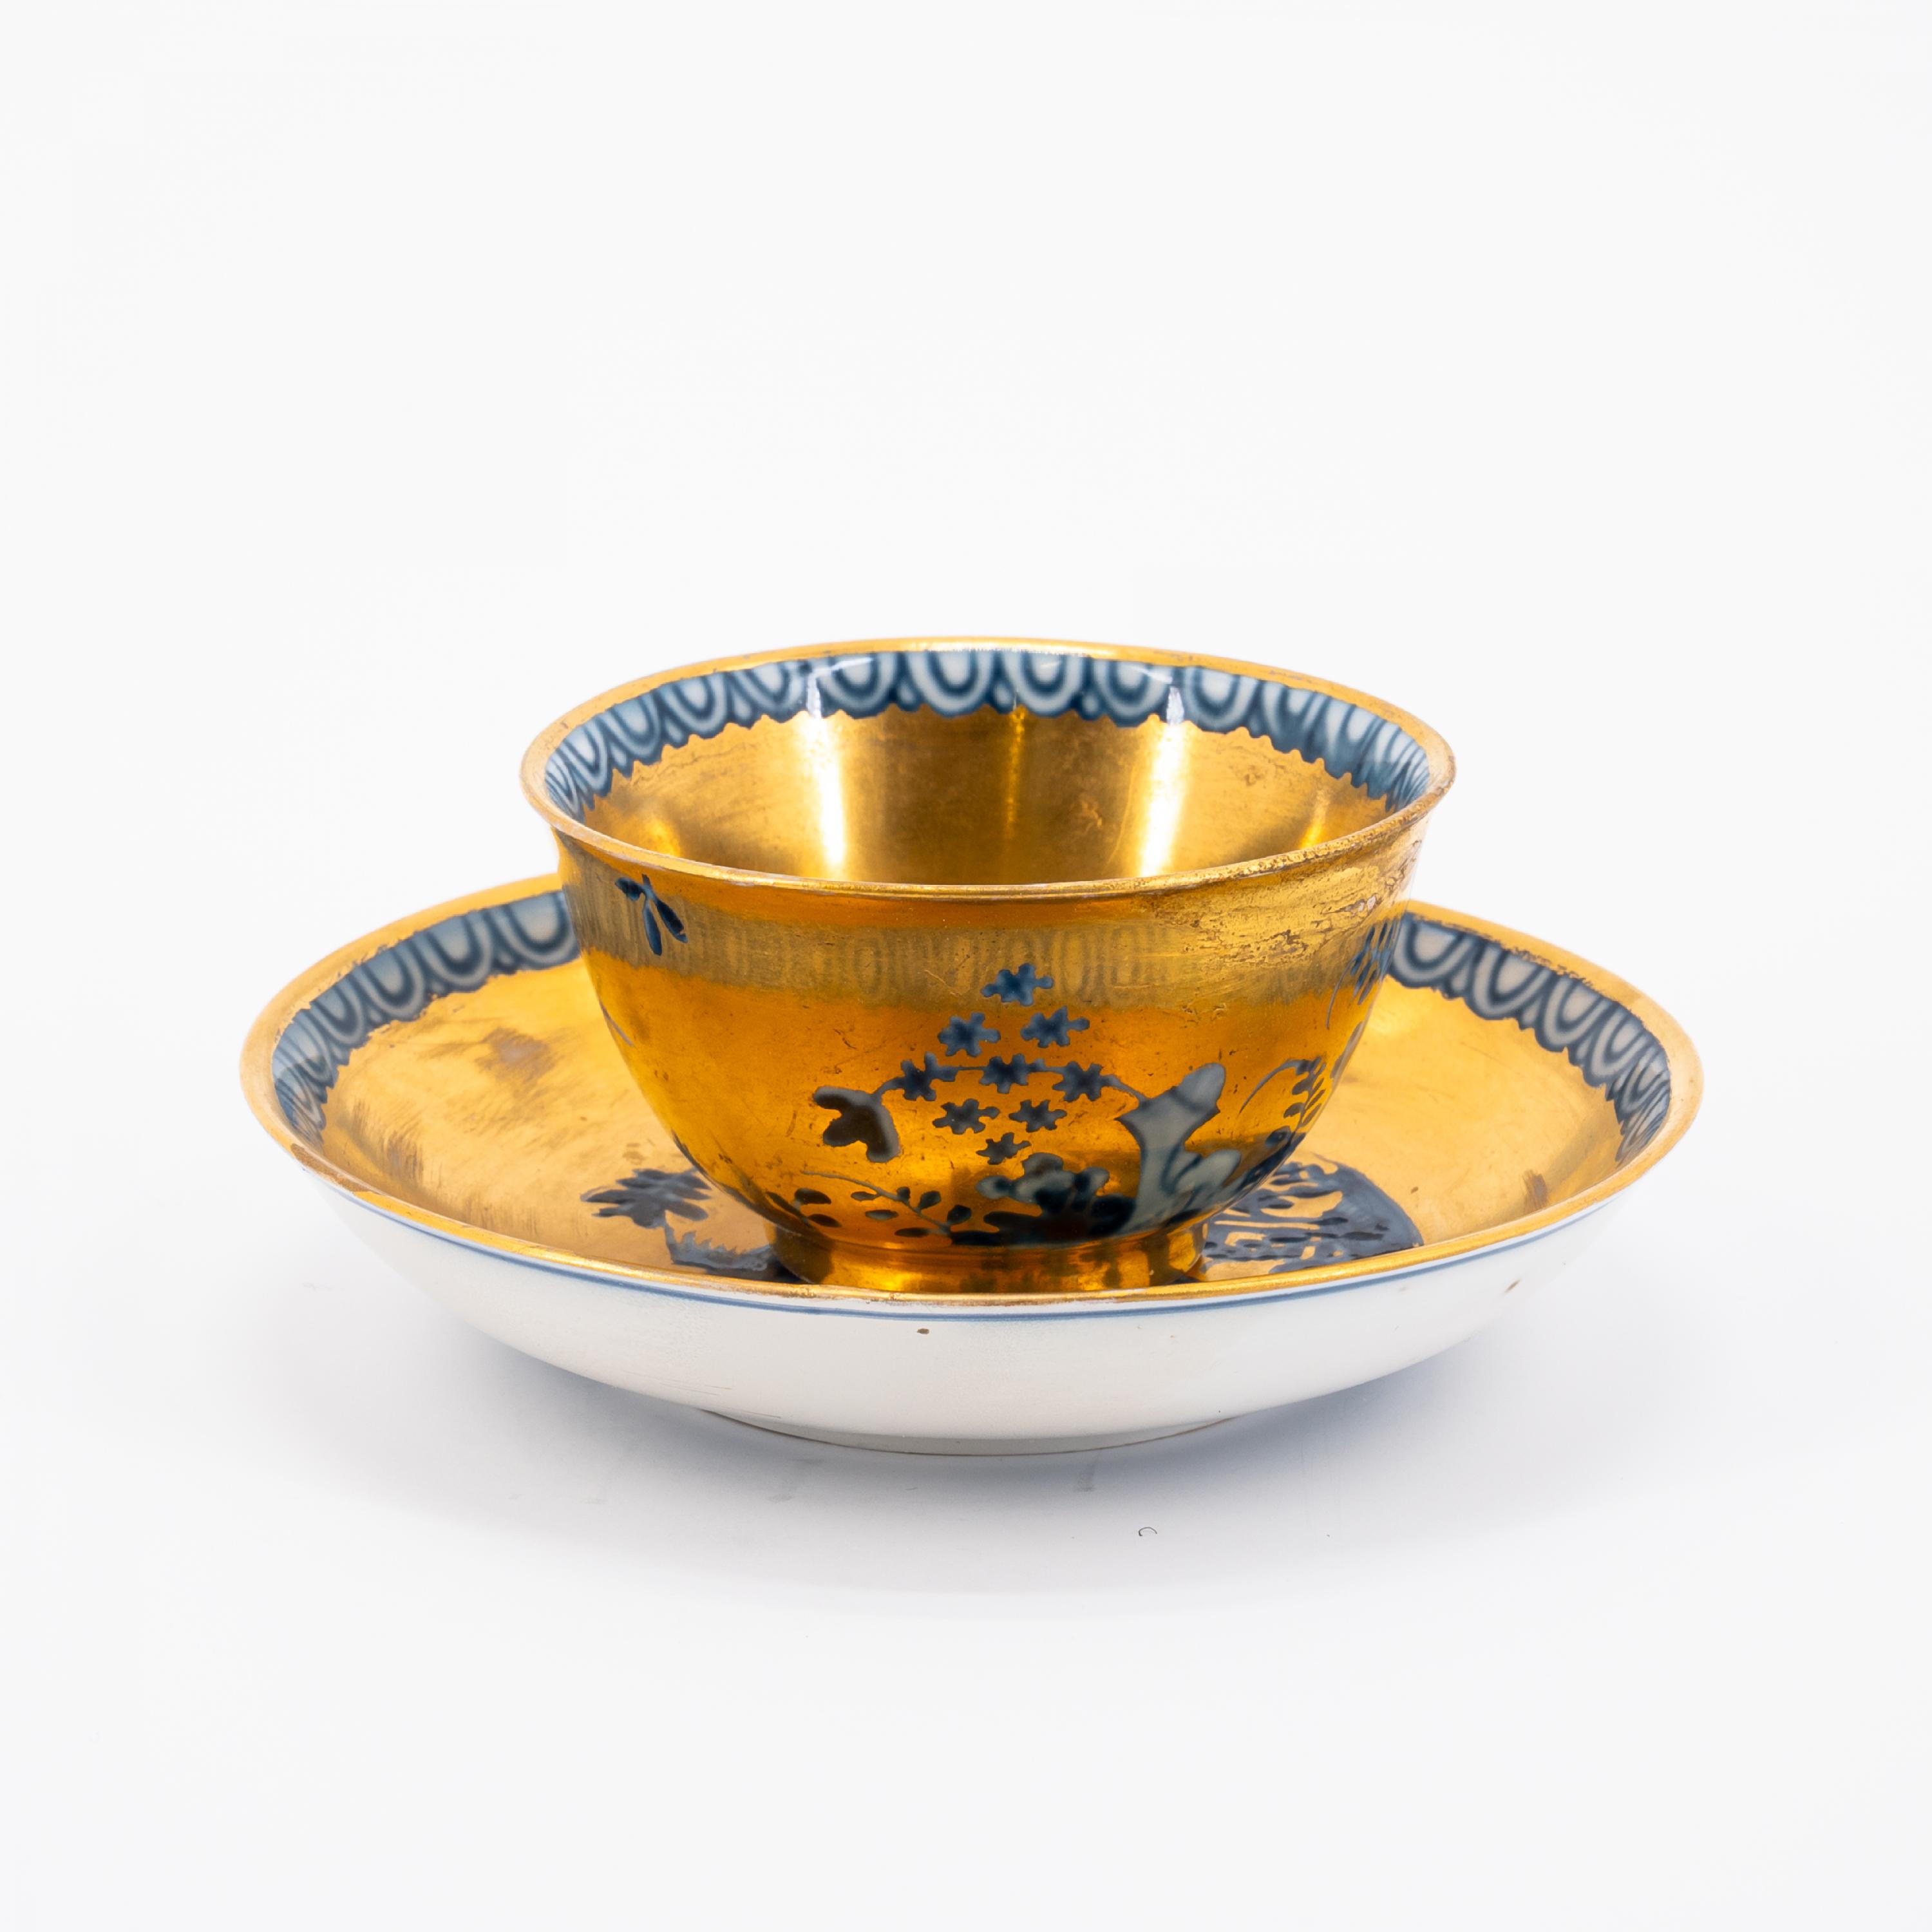 PORCELAIN ENSEMBLE OF SLOP BOWL, TWO CUPS AND SAUCERS WITH GILDED DECOR - Image 14 of 16